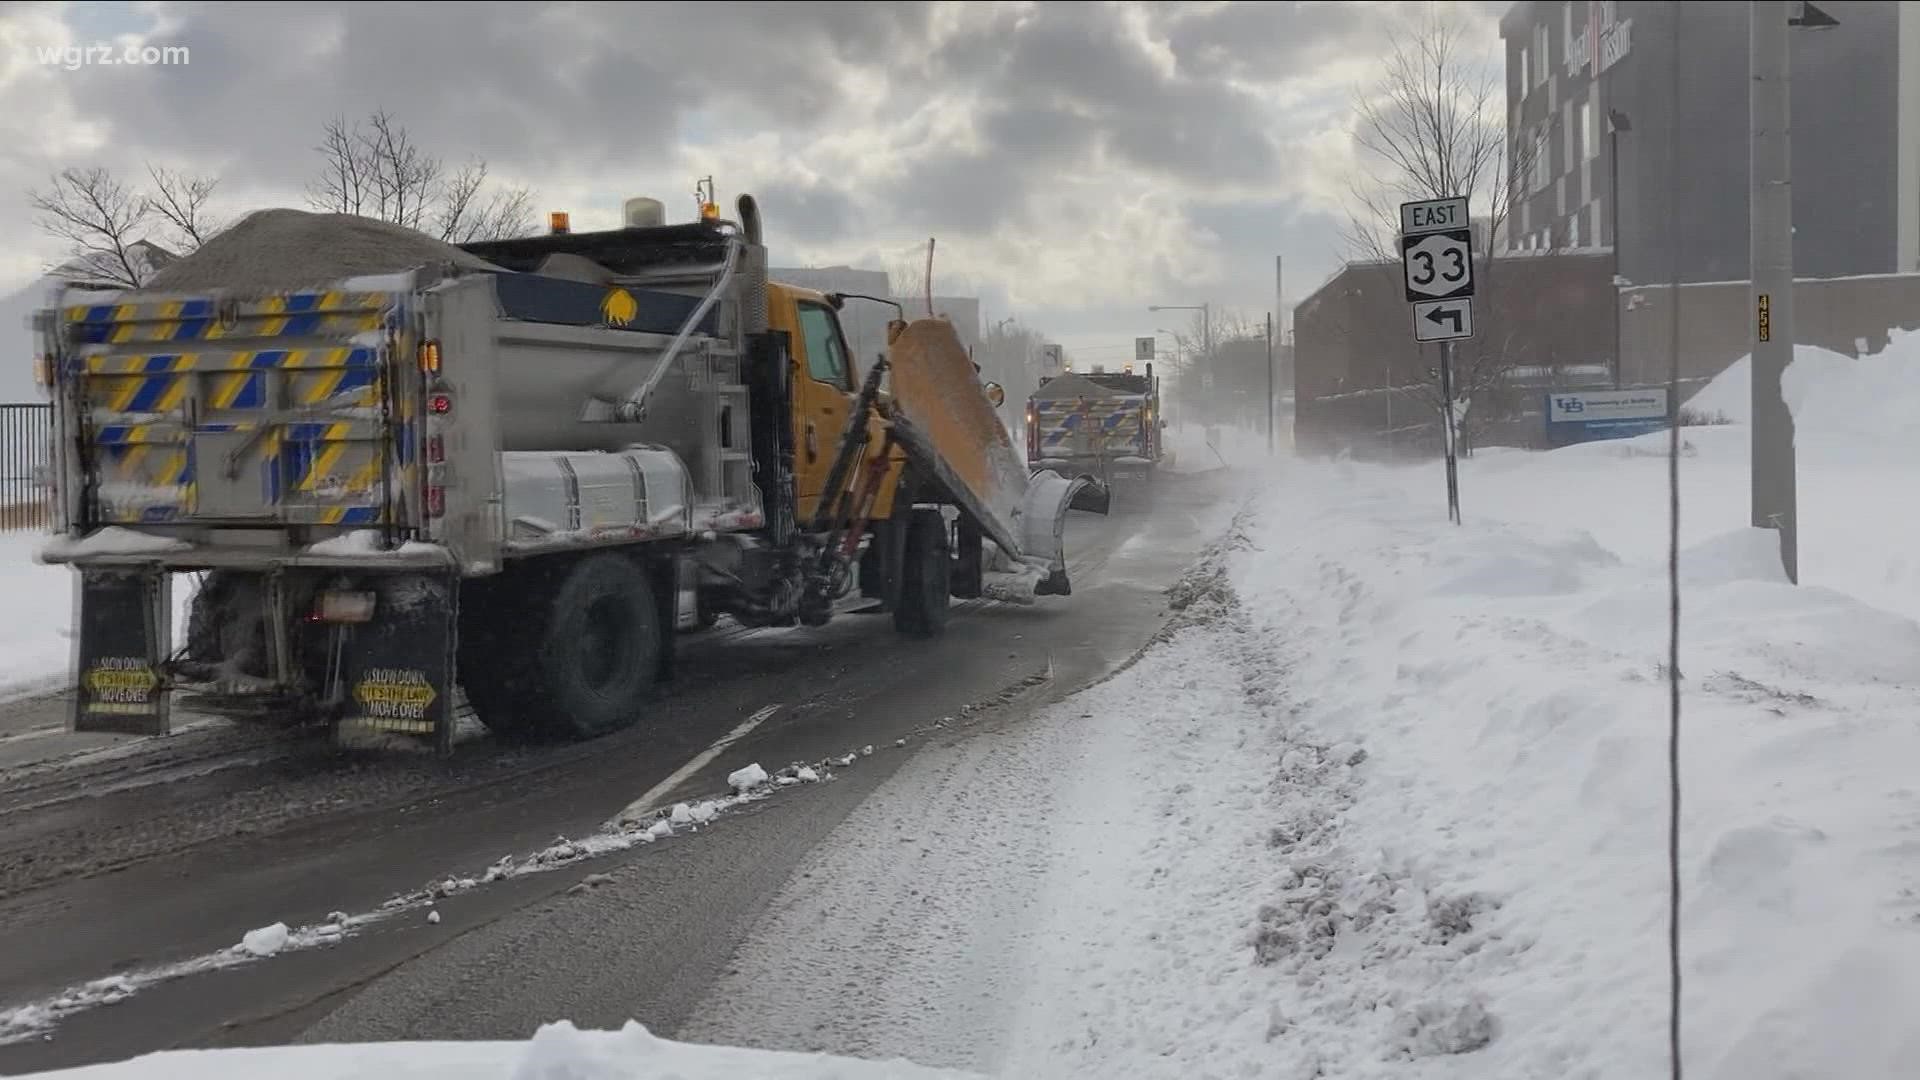 City of Buffalo says their plow crews had been loading up the salt and plowing all day since the storm really hit about 7 AM.